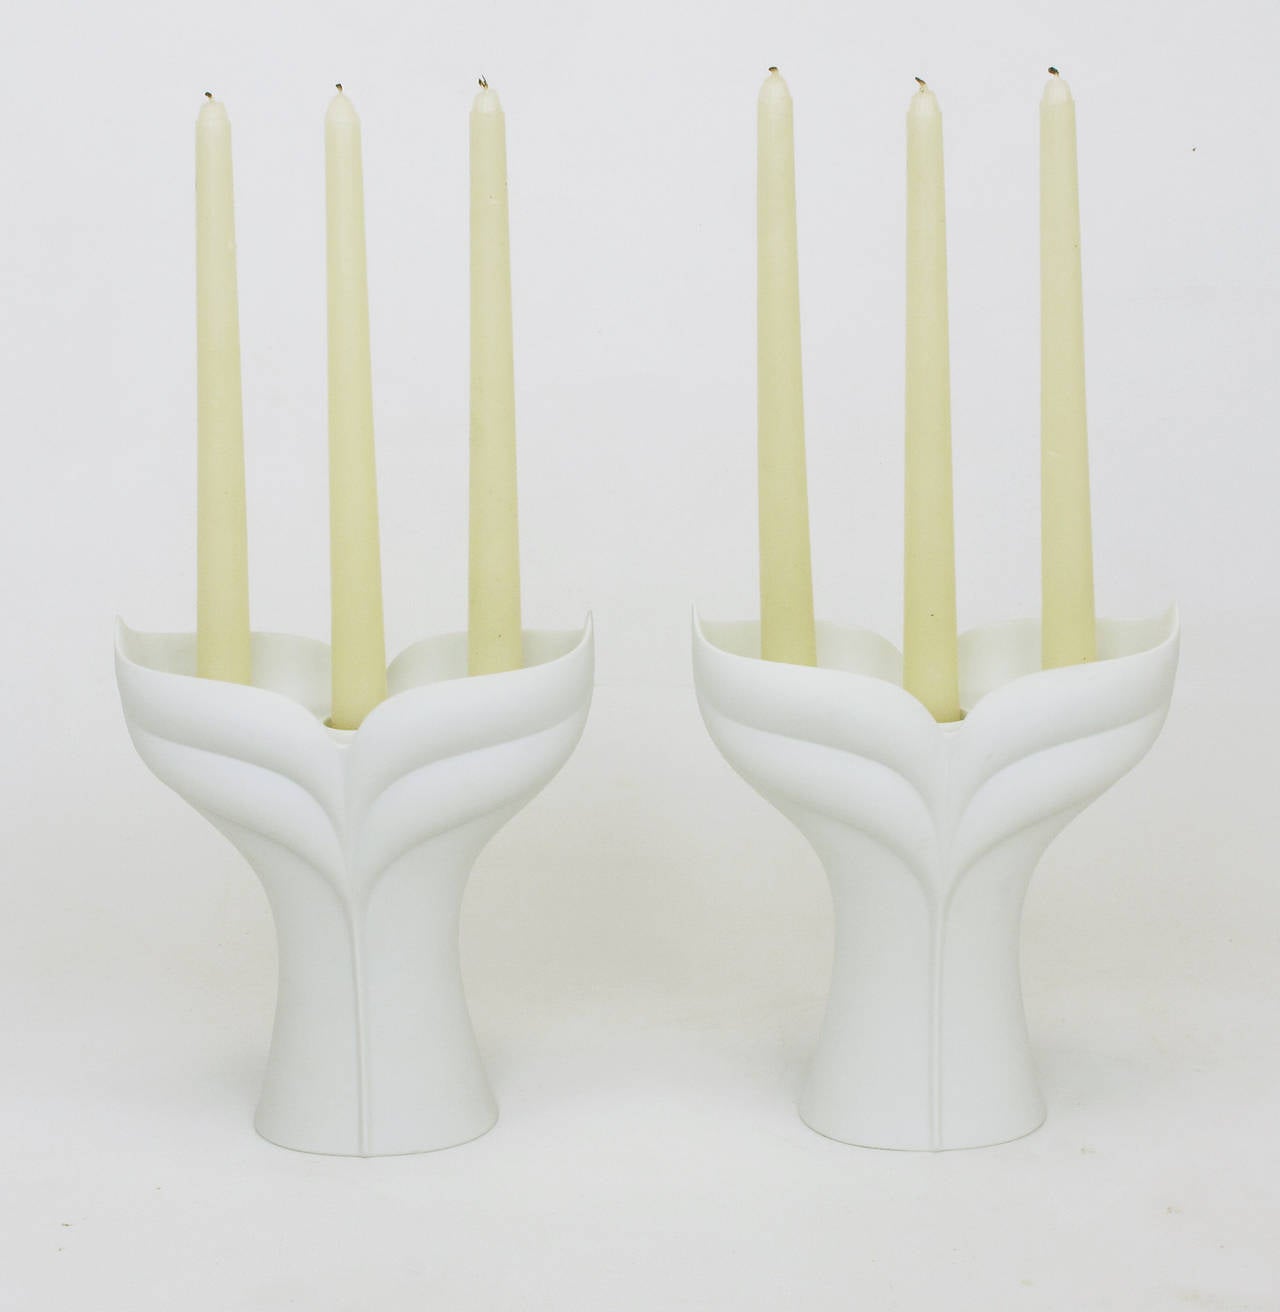 Pair of white matte porcelain three-light candelabrum by Uta Feyl for Rosenthal Studio Linie. Sometimes referred to as Feyl's Lotus line for Rosenthal, Germany.
Introduced in 1982 and no longer in production.